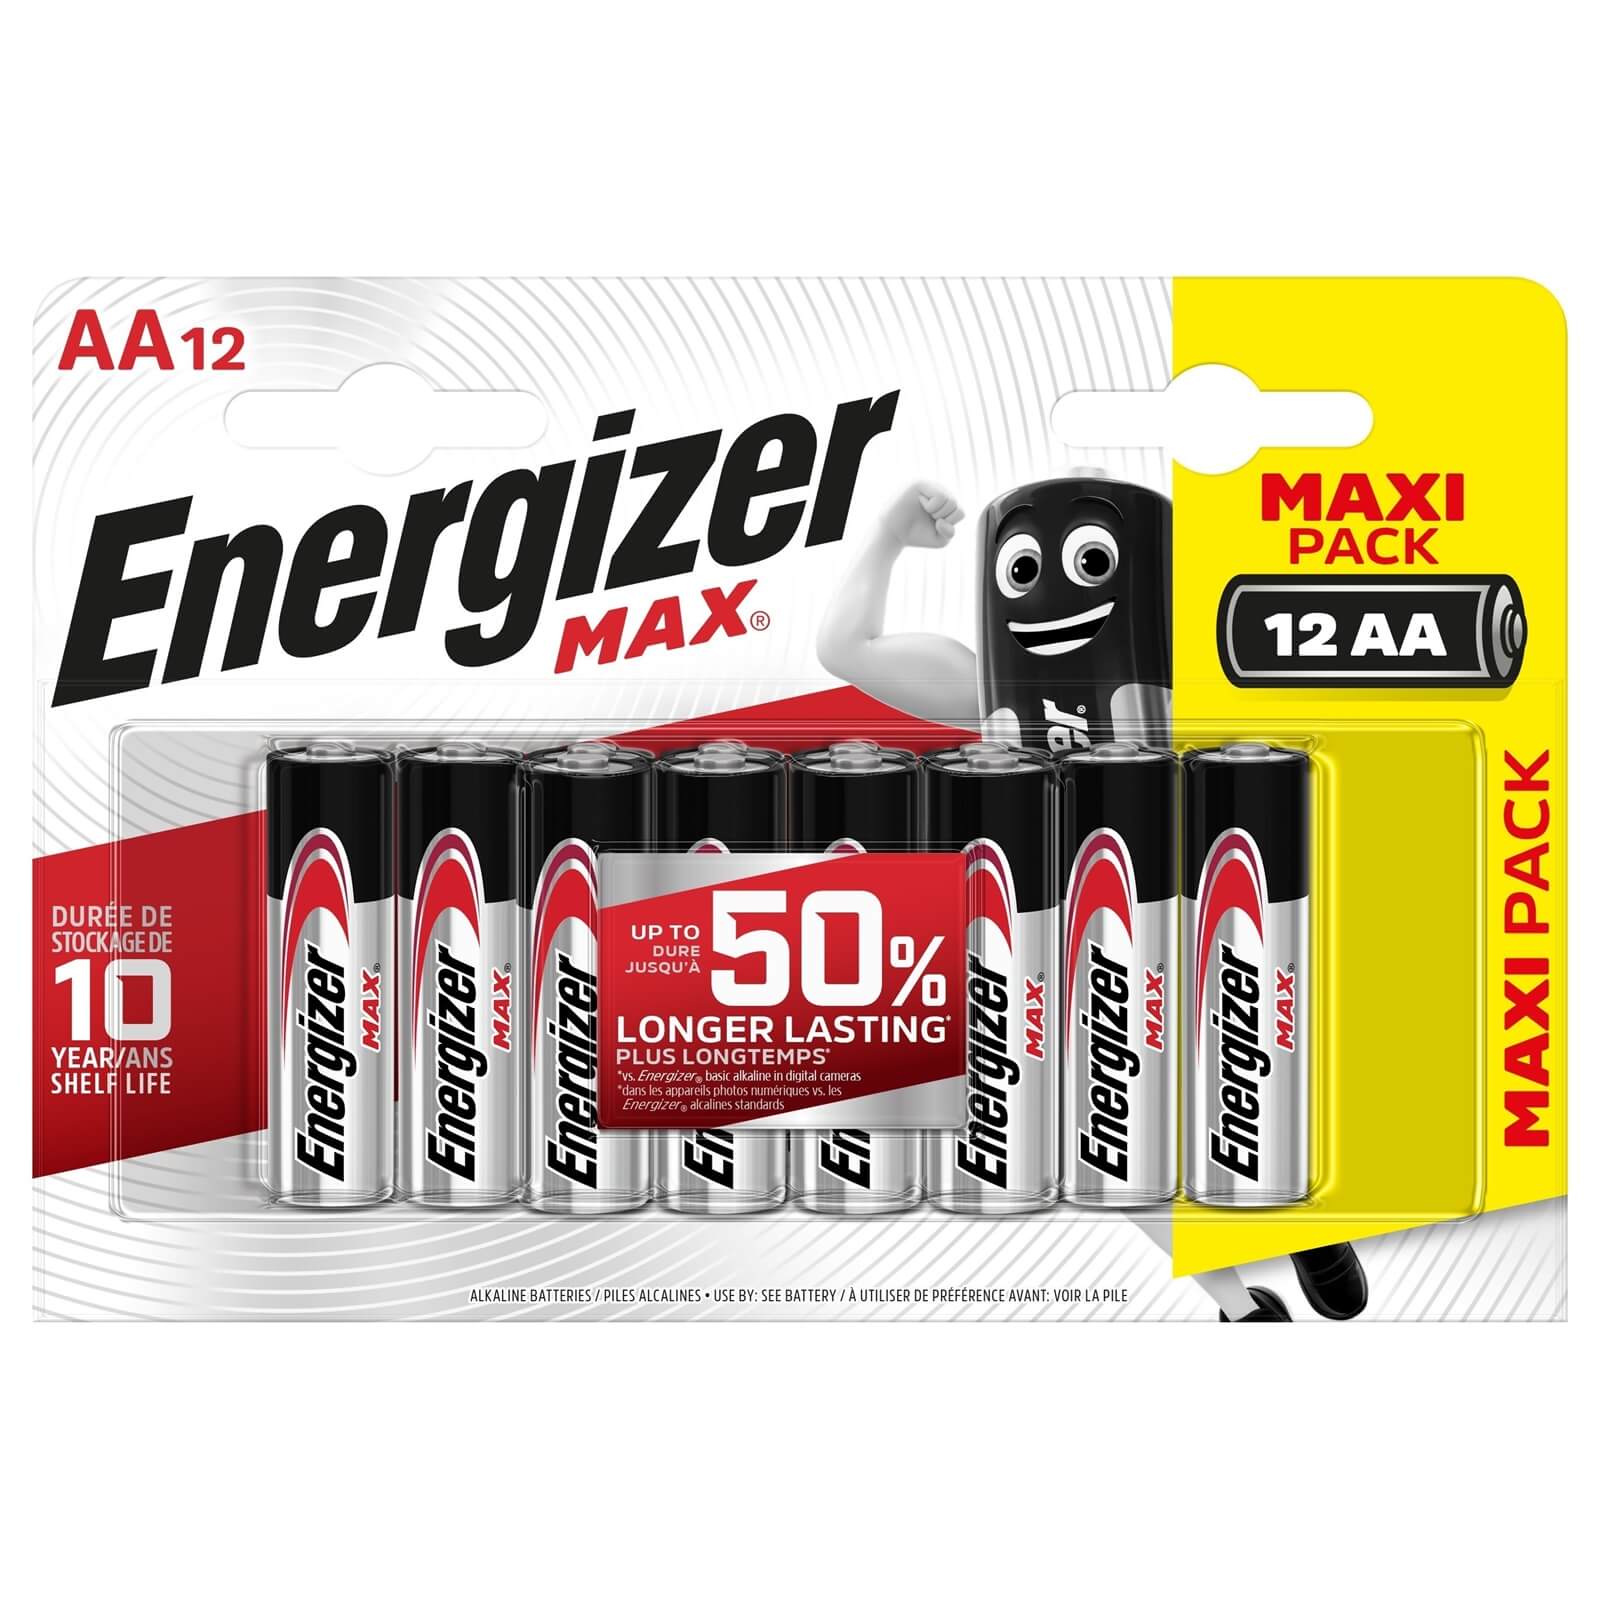 Photo of Energizer Max Alkaline Aa Batteries - 12 Pack